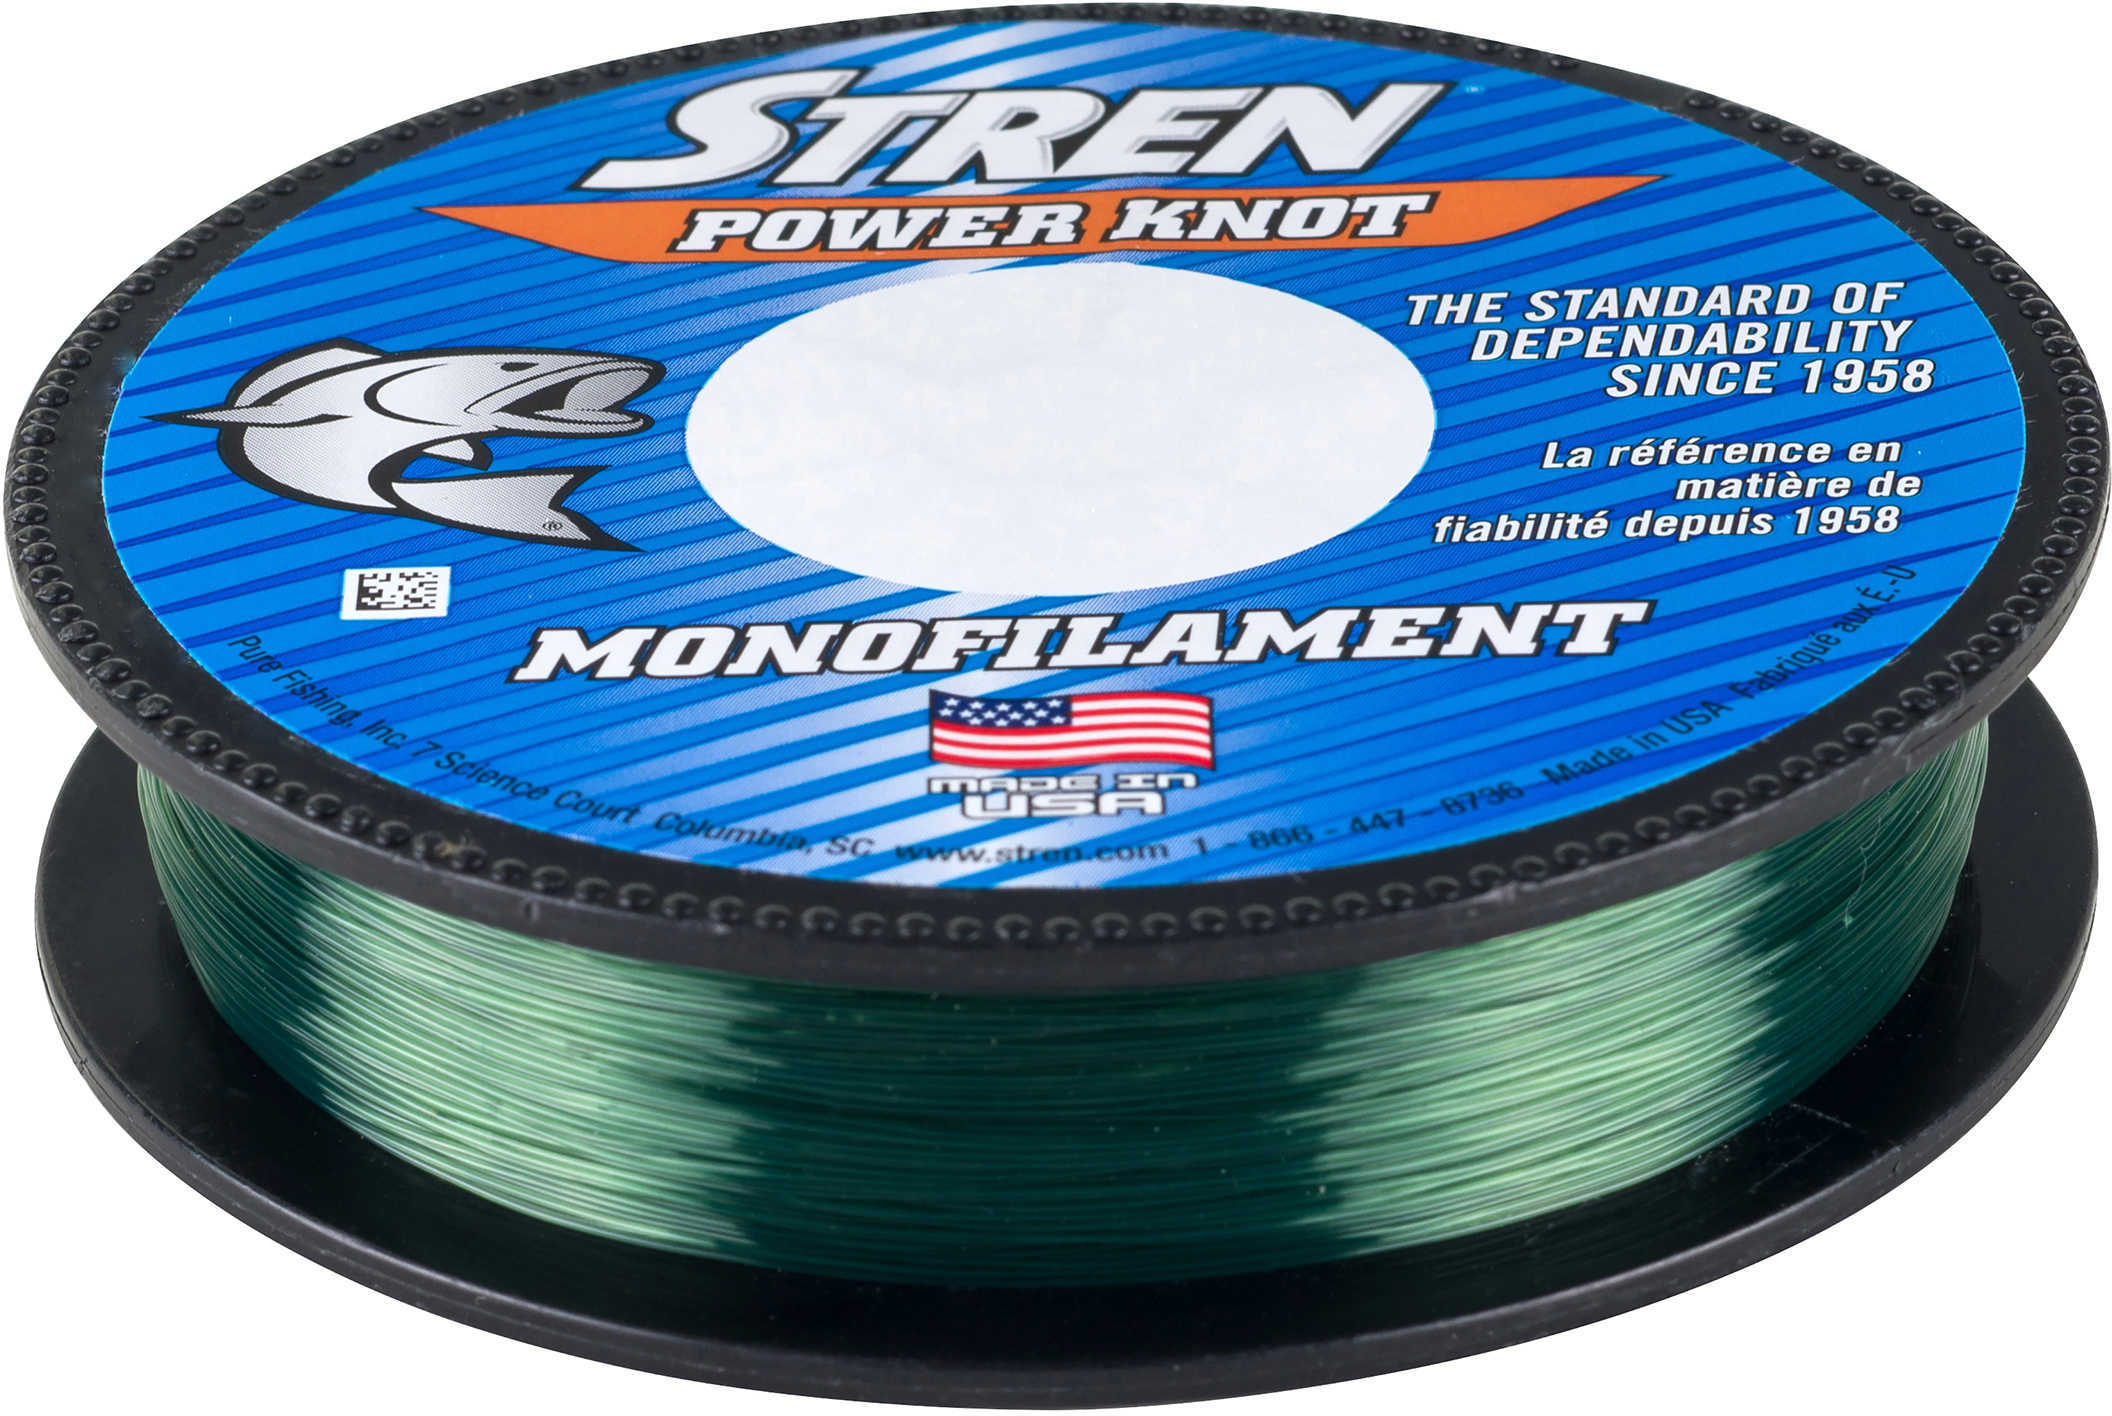 Power Knot 220 Yards , 17 lbs Strength, 0.017", Lo-Vis Green Md: 1367564